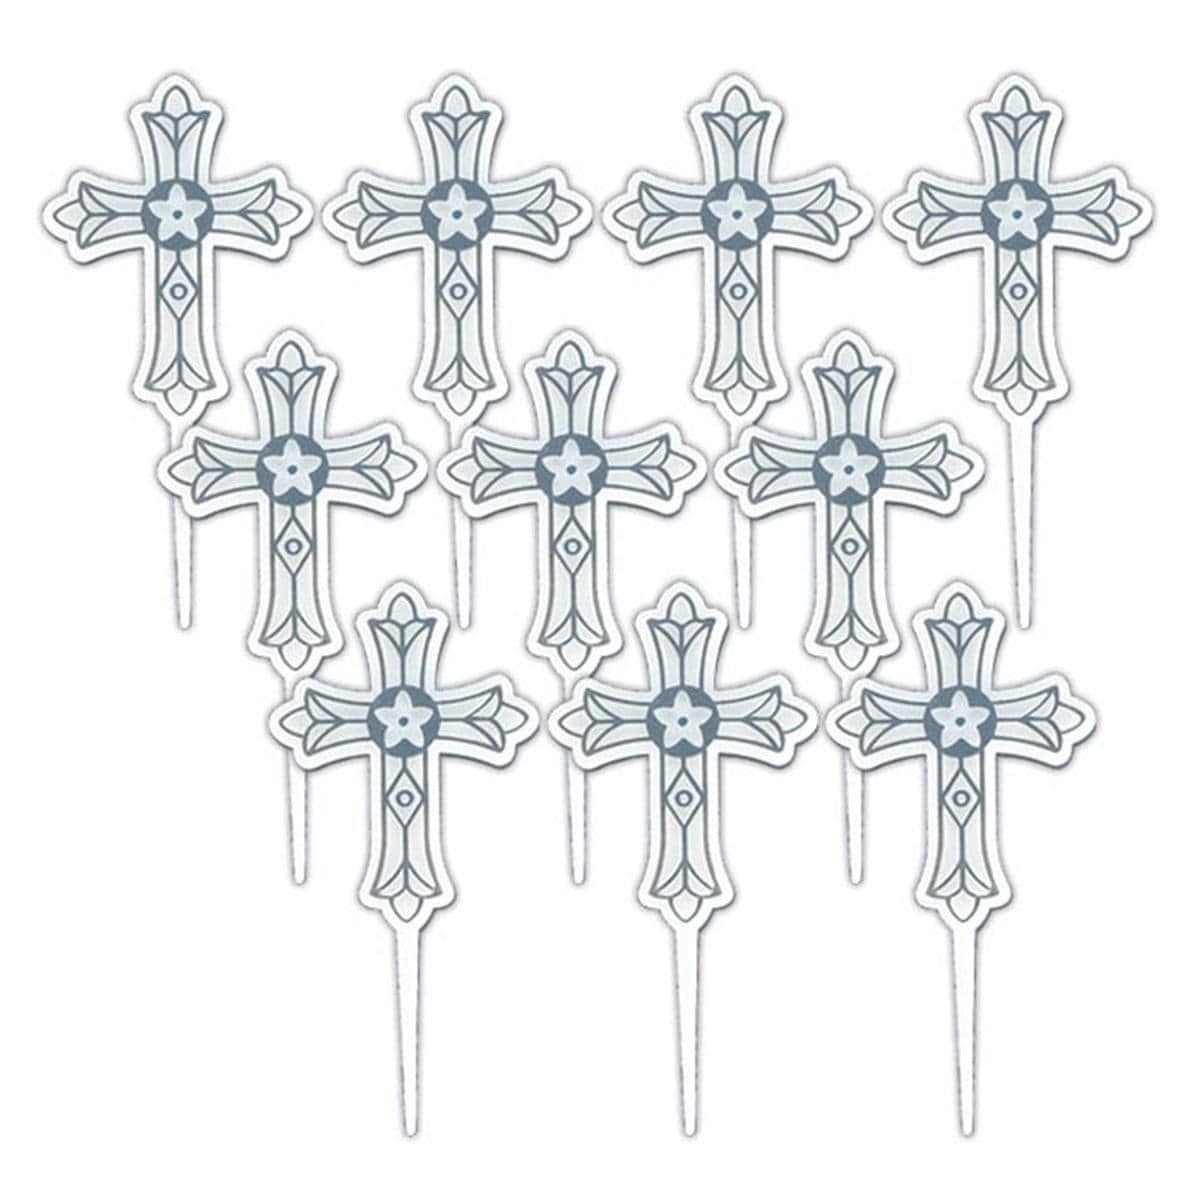 Buy Religious Cross Shaped Picks 3 In. 36/pkg. sold at Party Expert